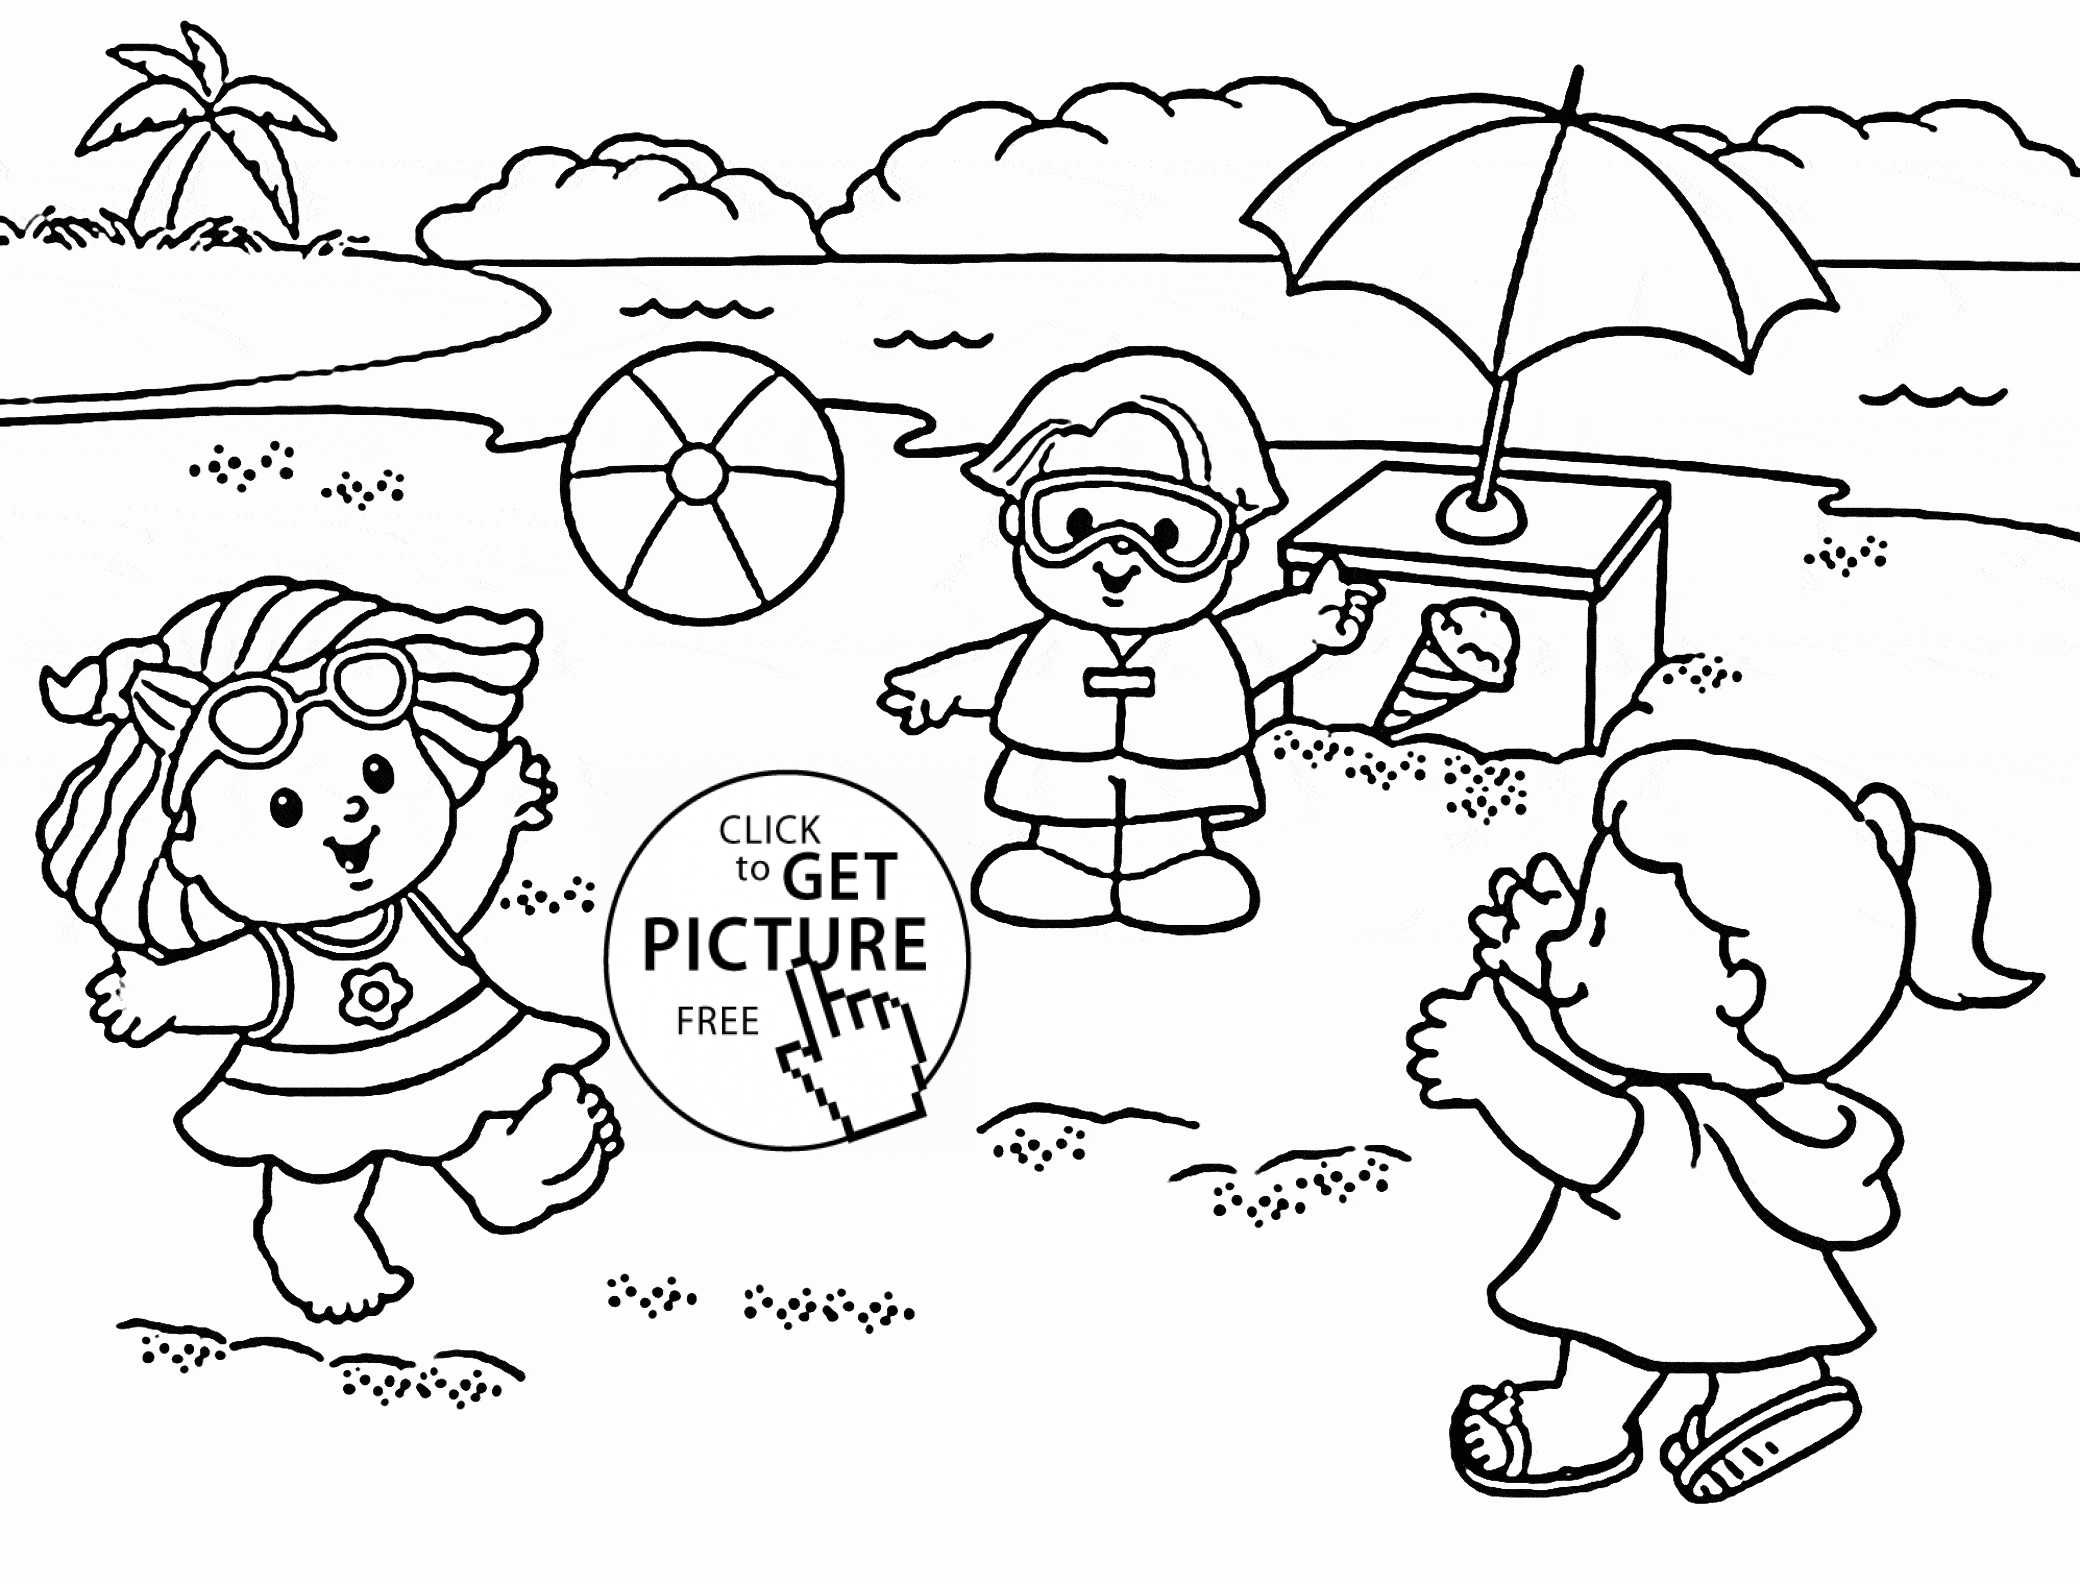 27 Summer season coloring pages part 2 | Free Printables